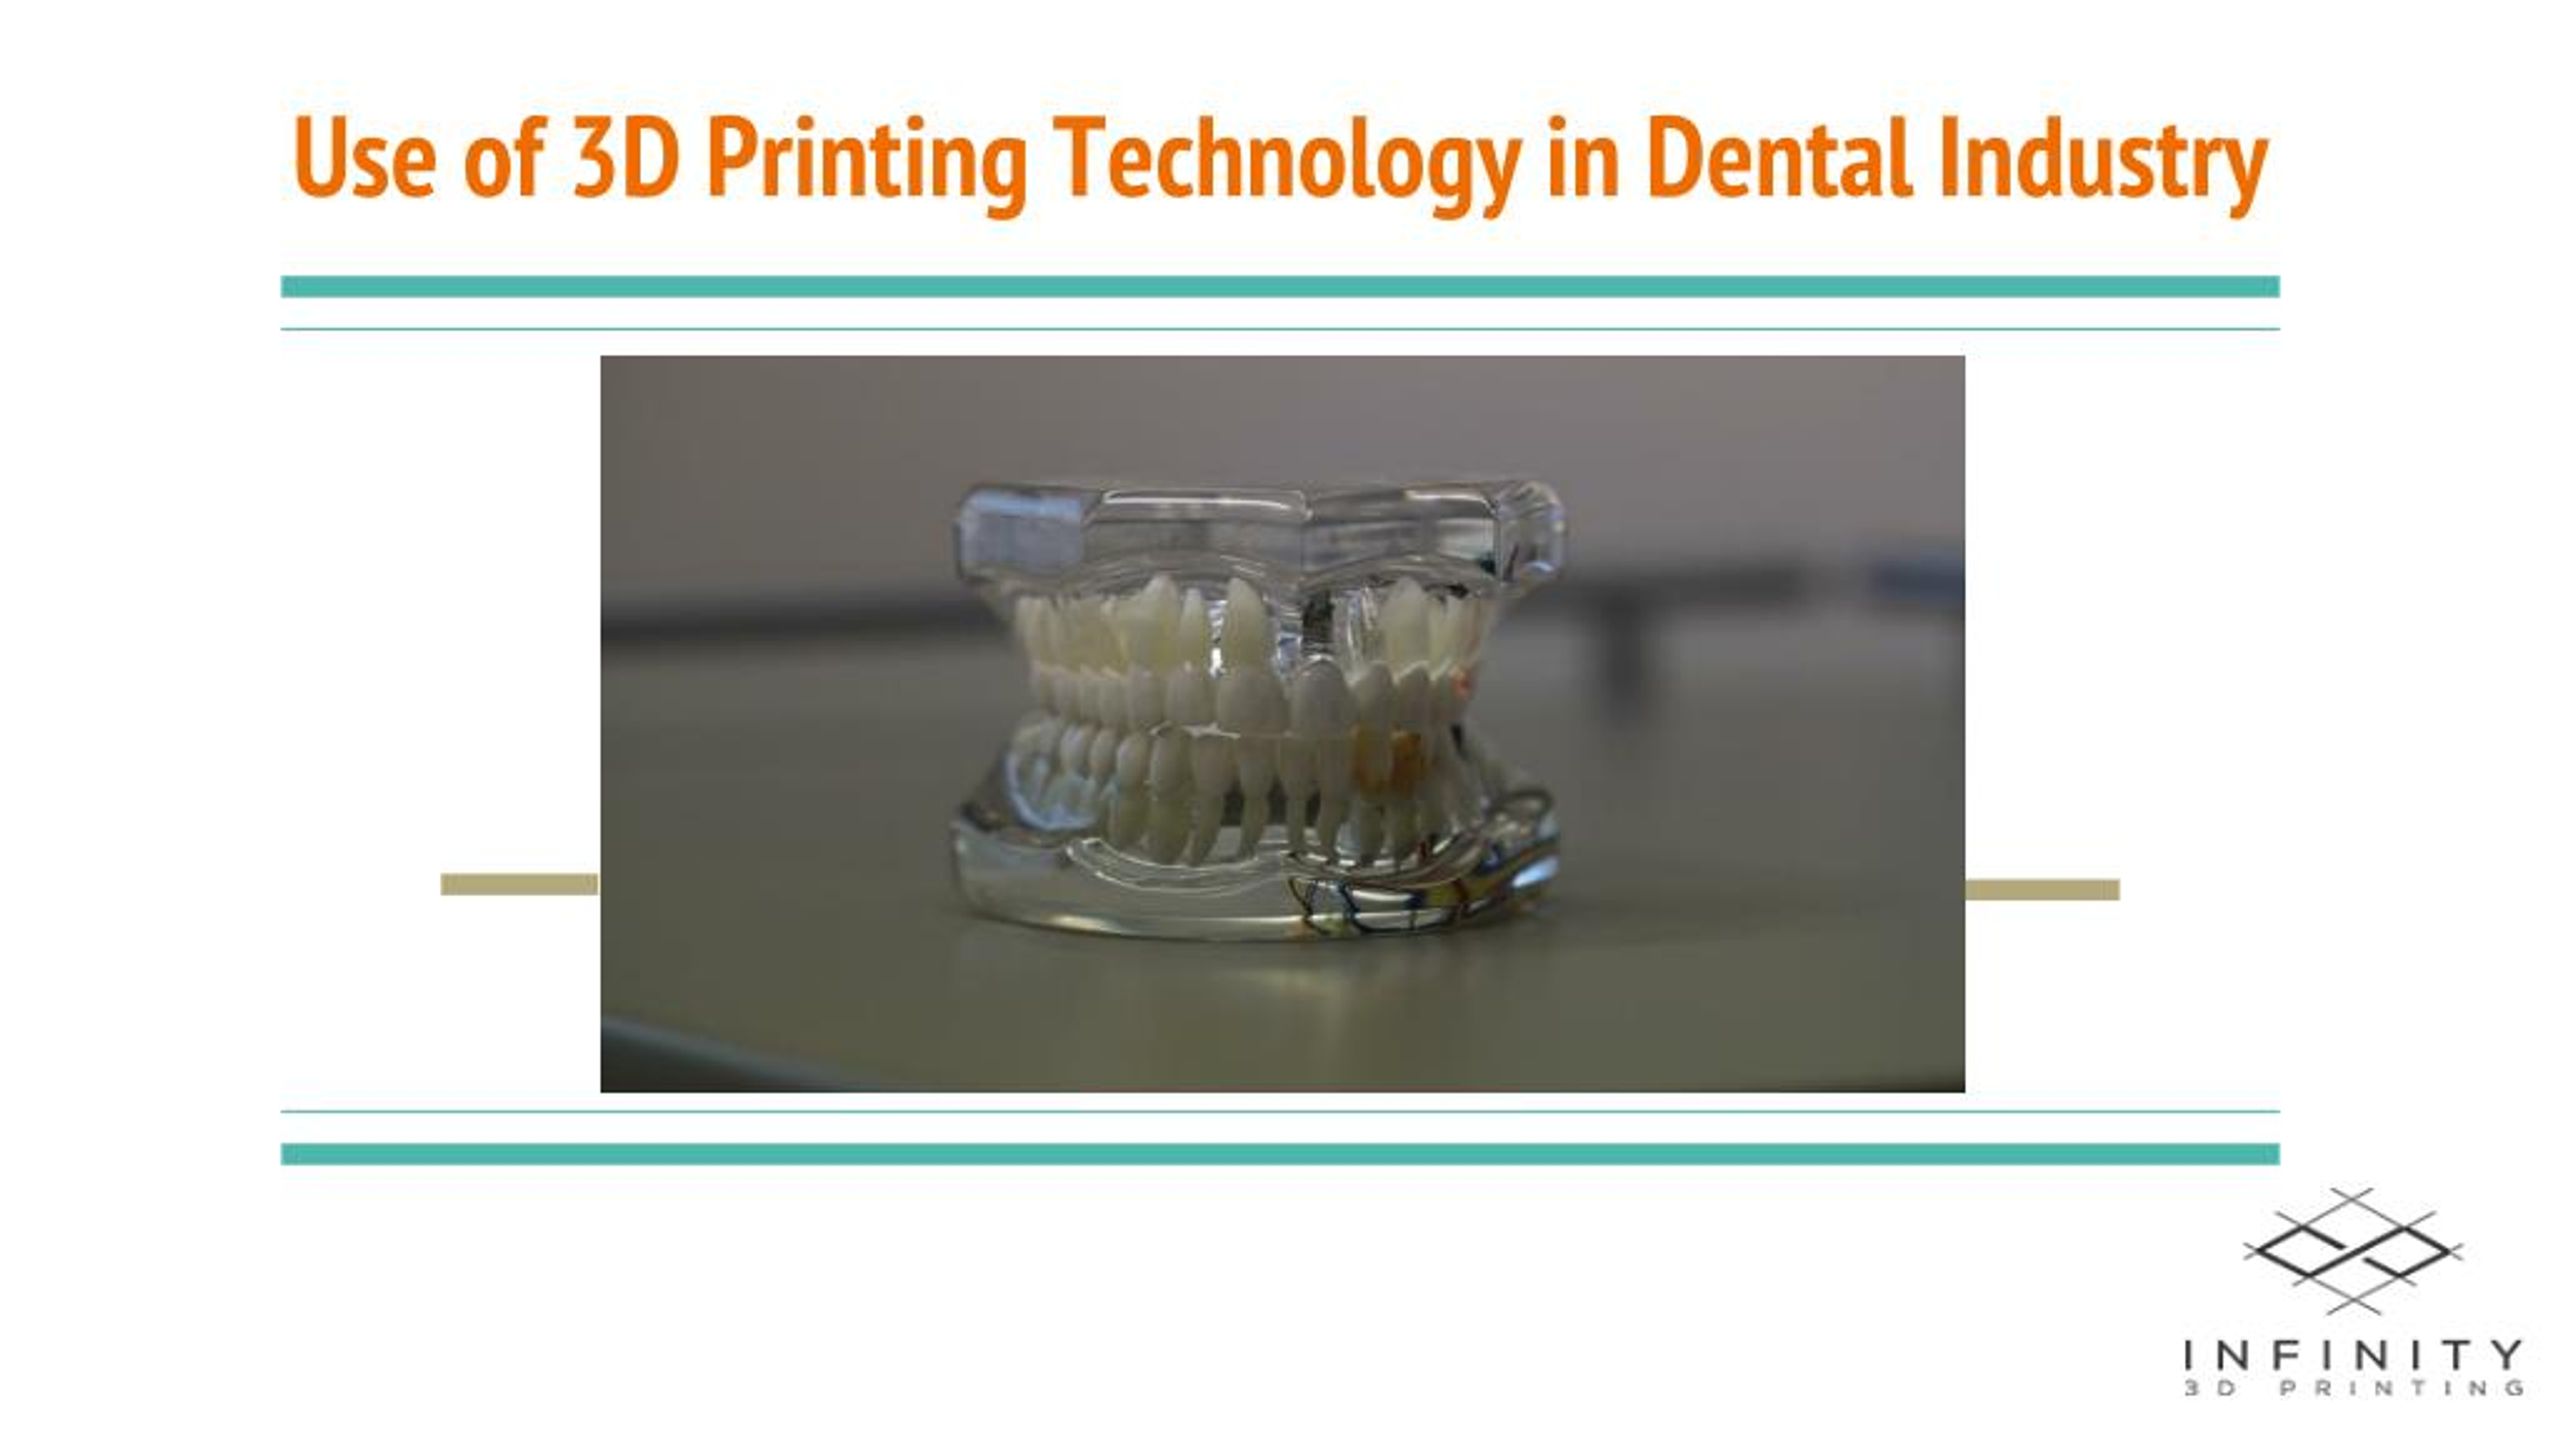 PPT - Use of 3D Printing Technology in Dental Industry PowerPoint